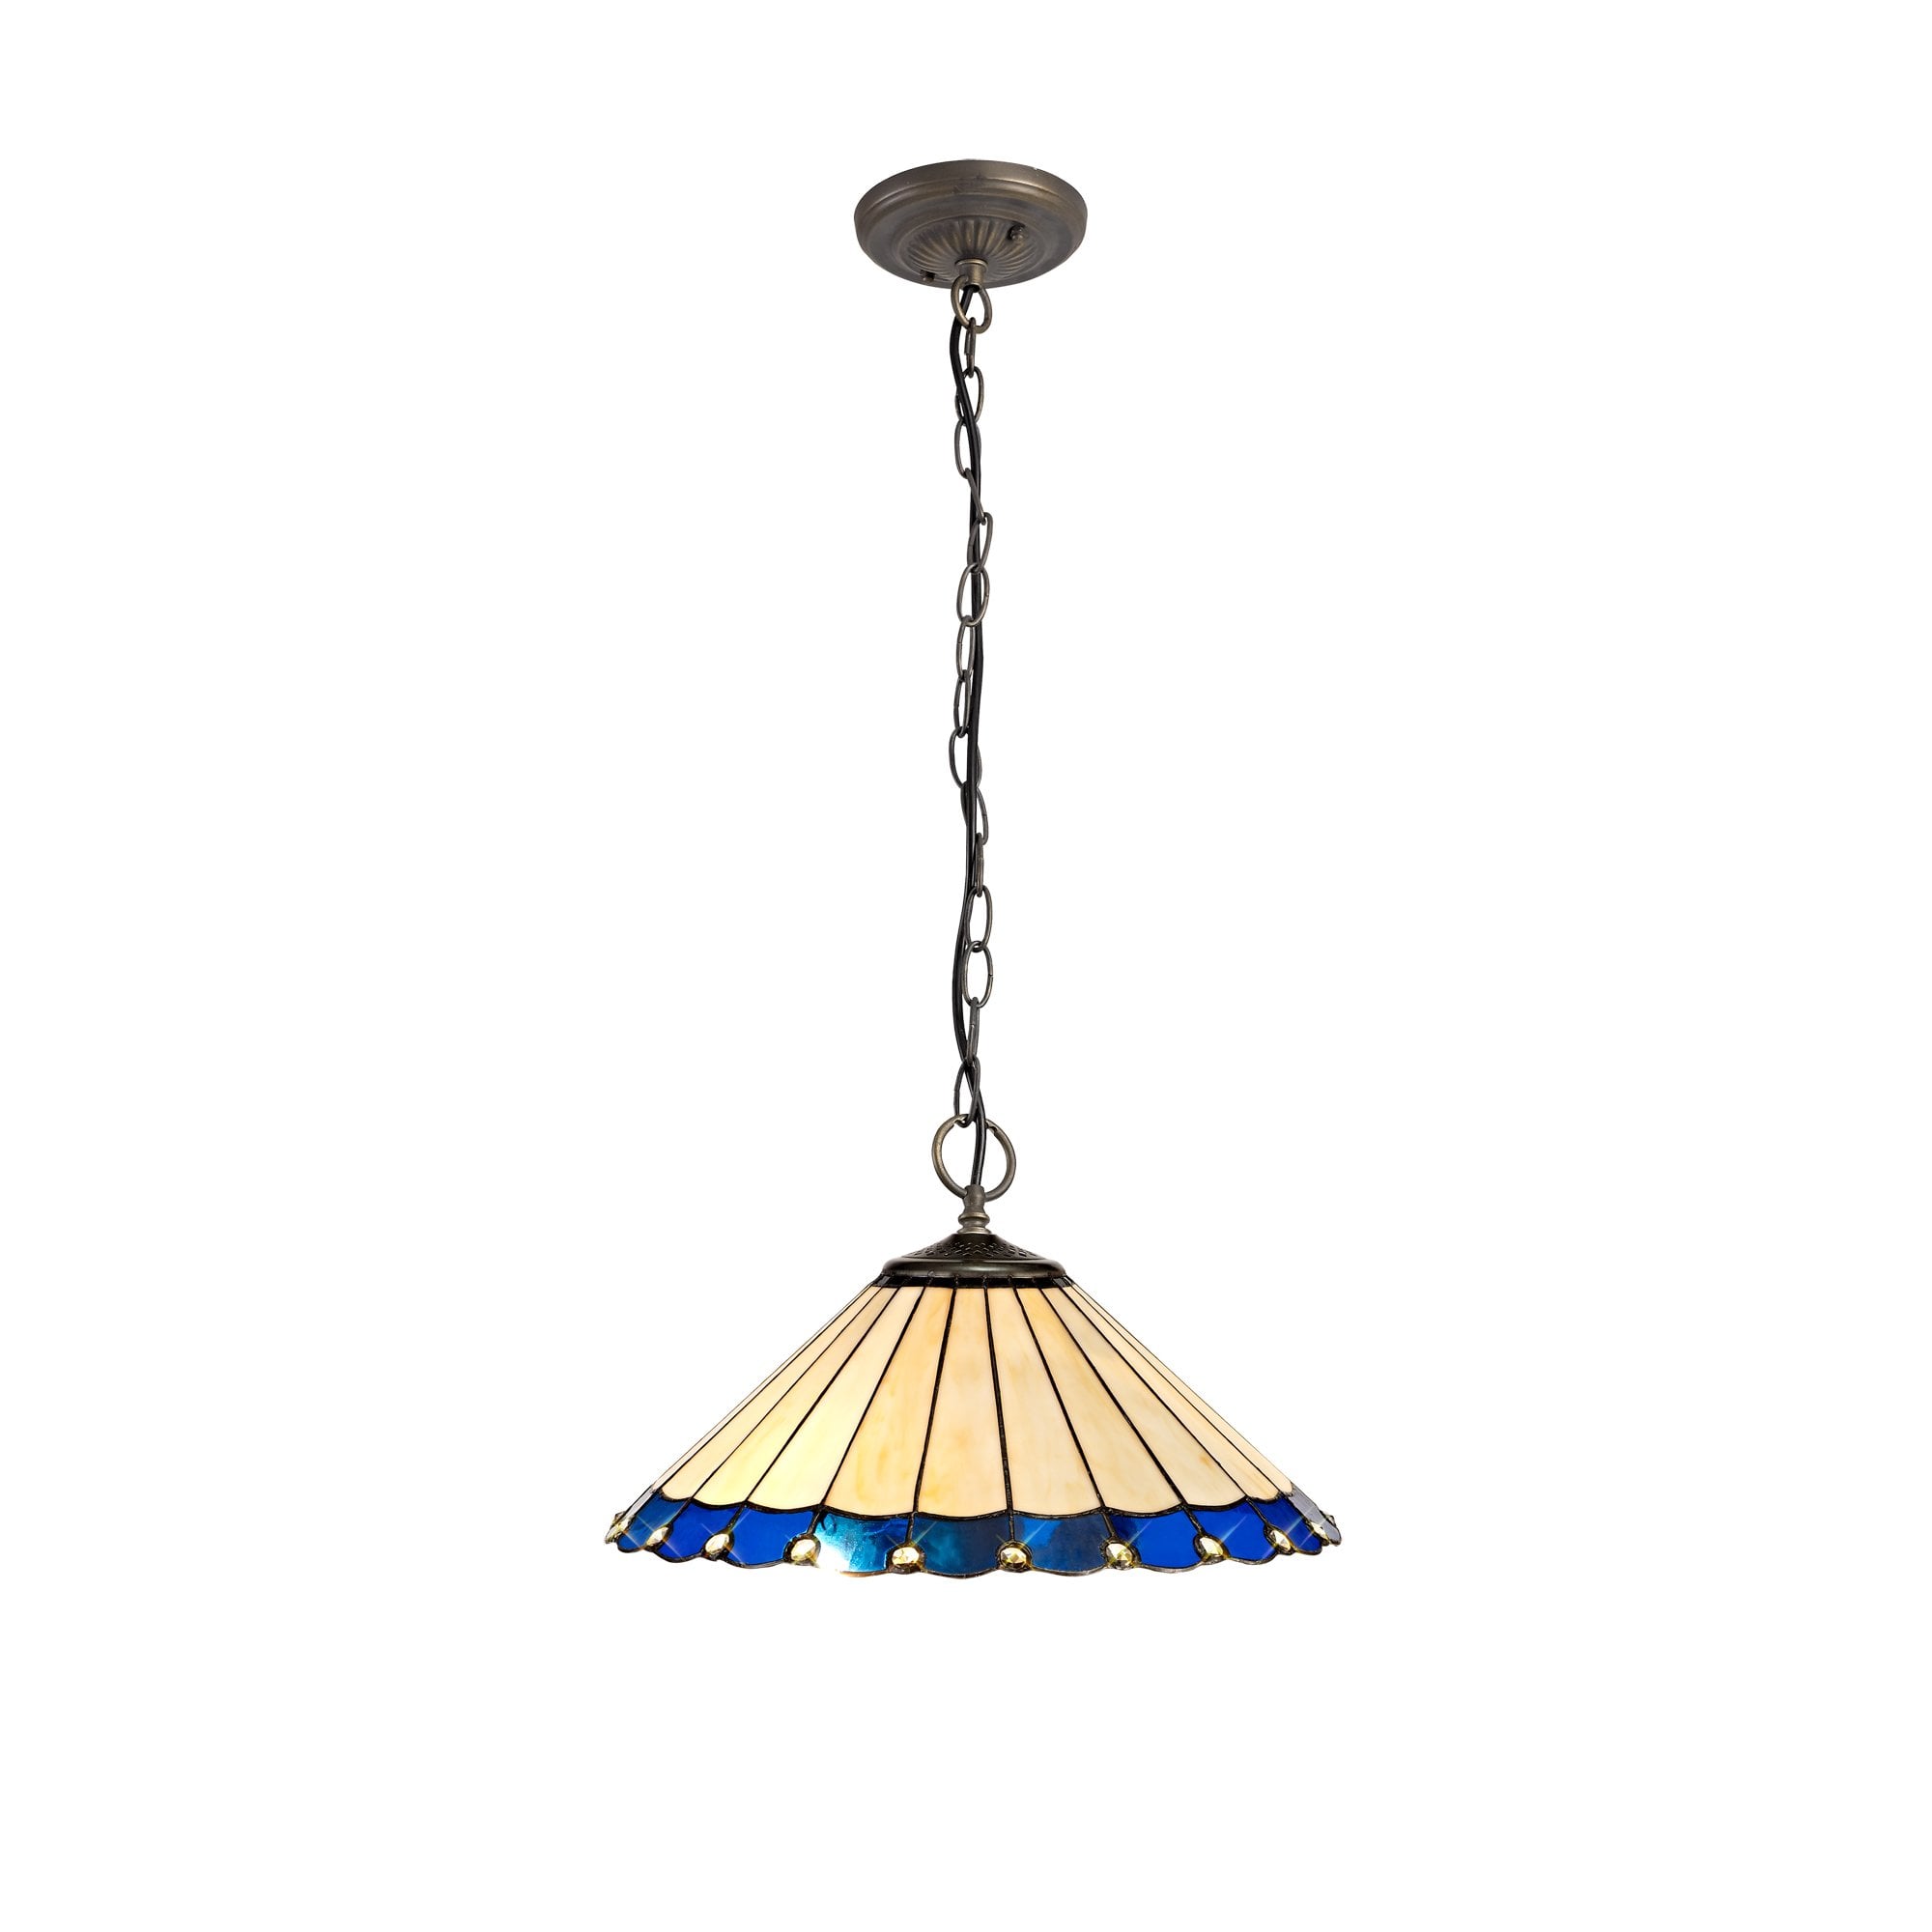 3 Light Downlighter Pendant E27 With 40cm Tiffany Shade, Blue/Cream/Crystal/Aged Antique Brass